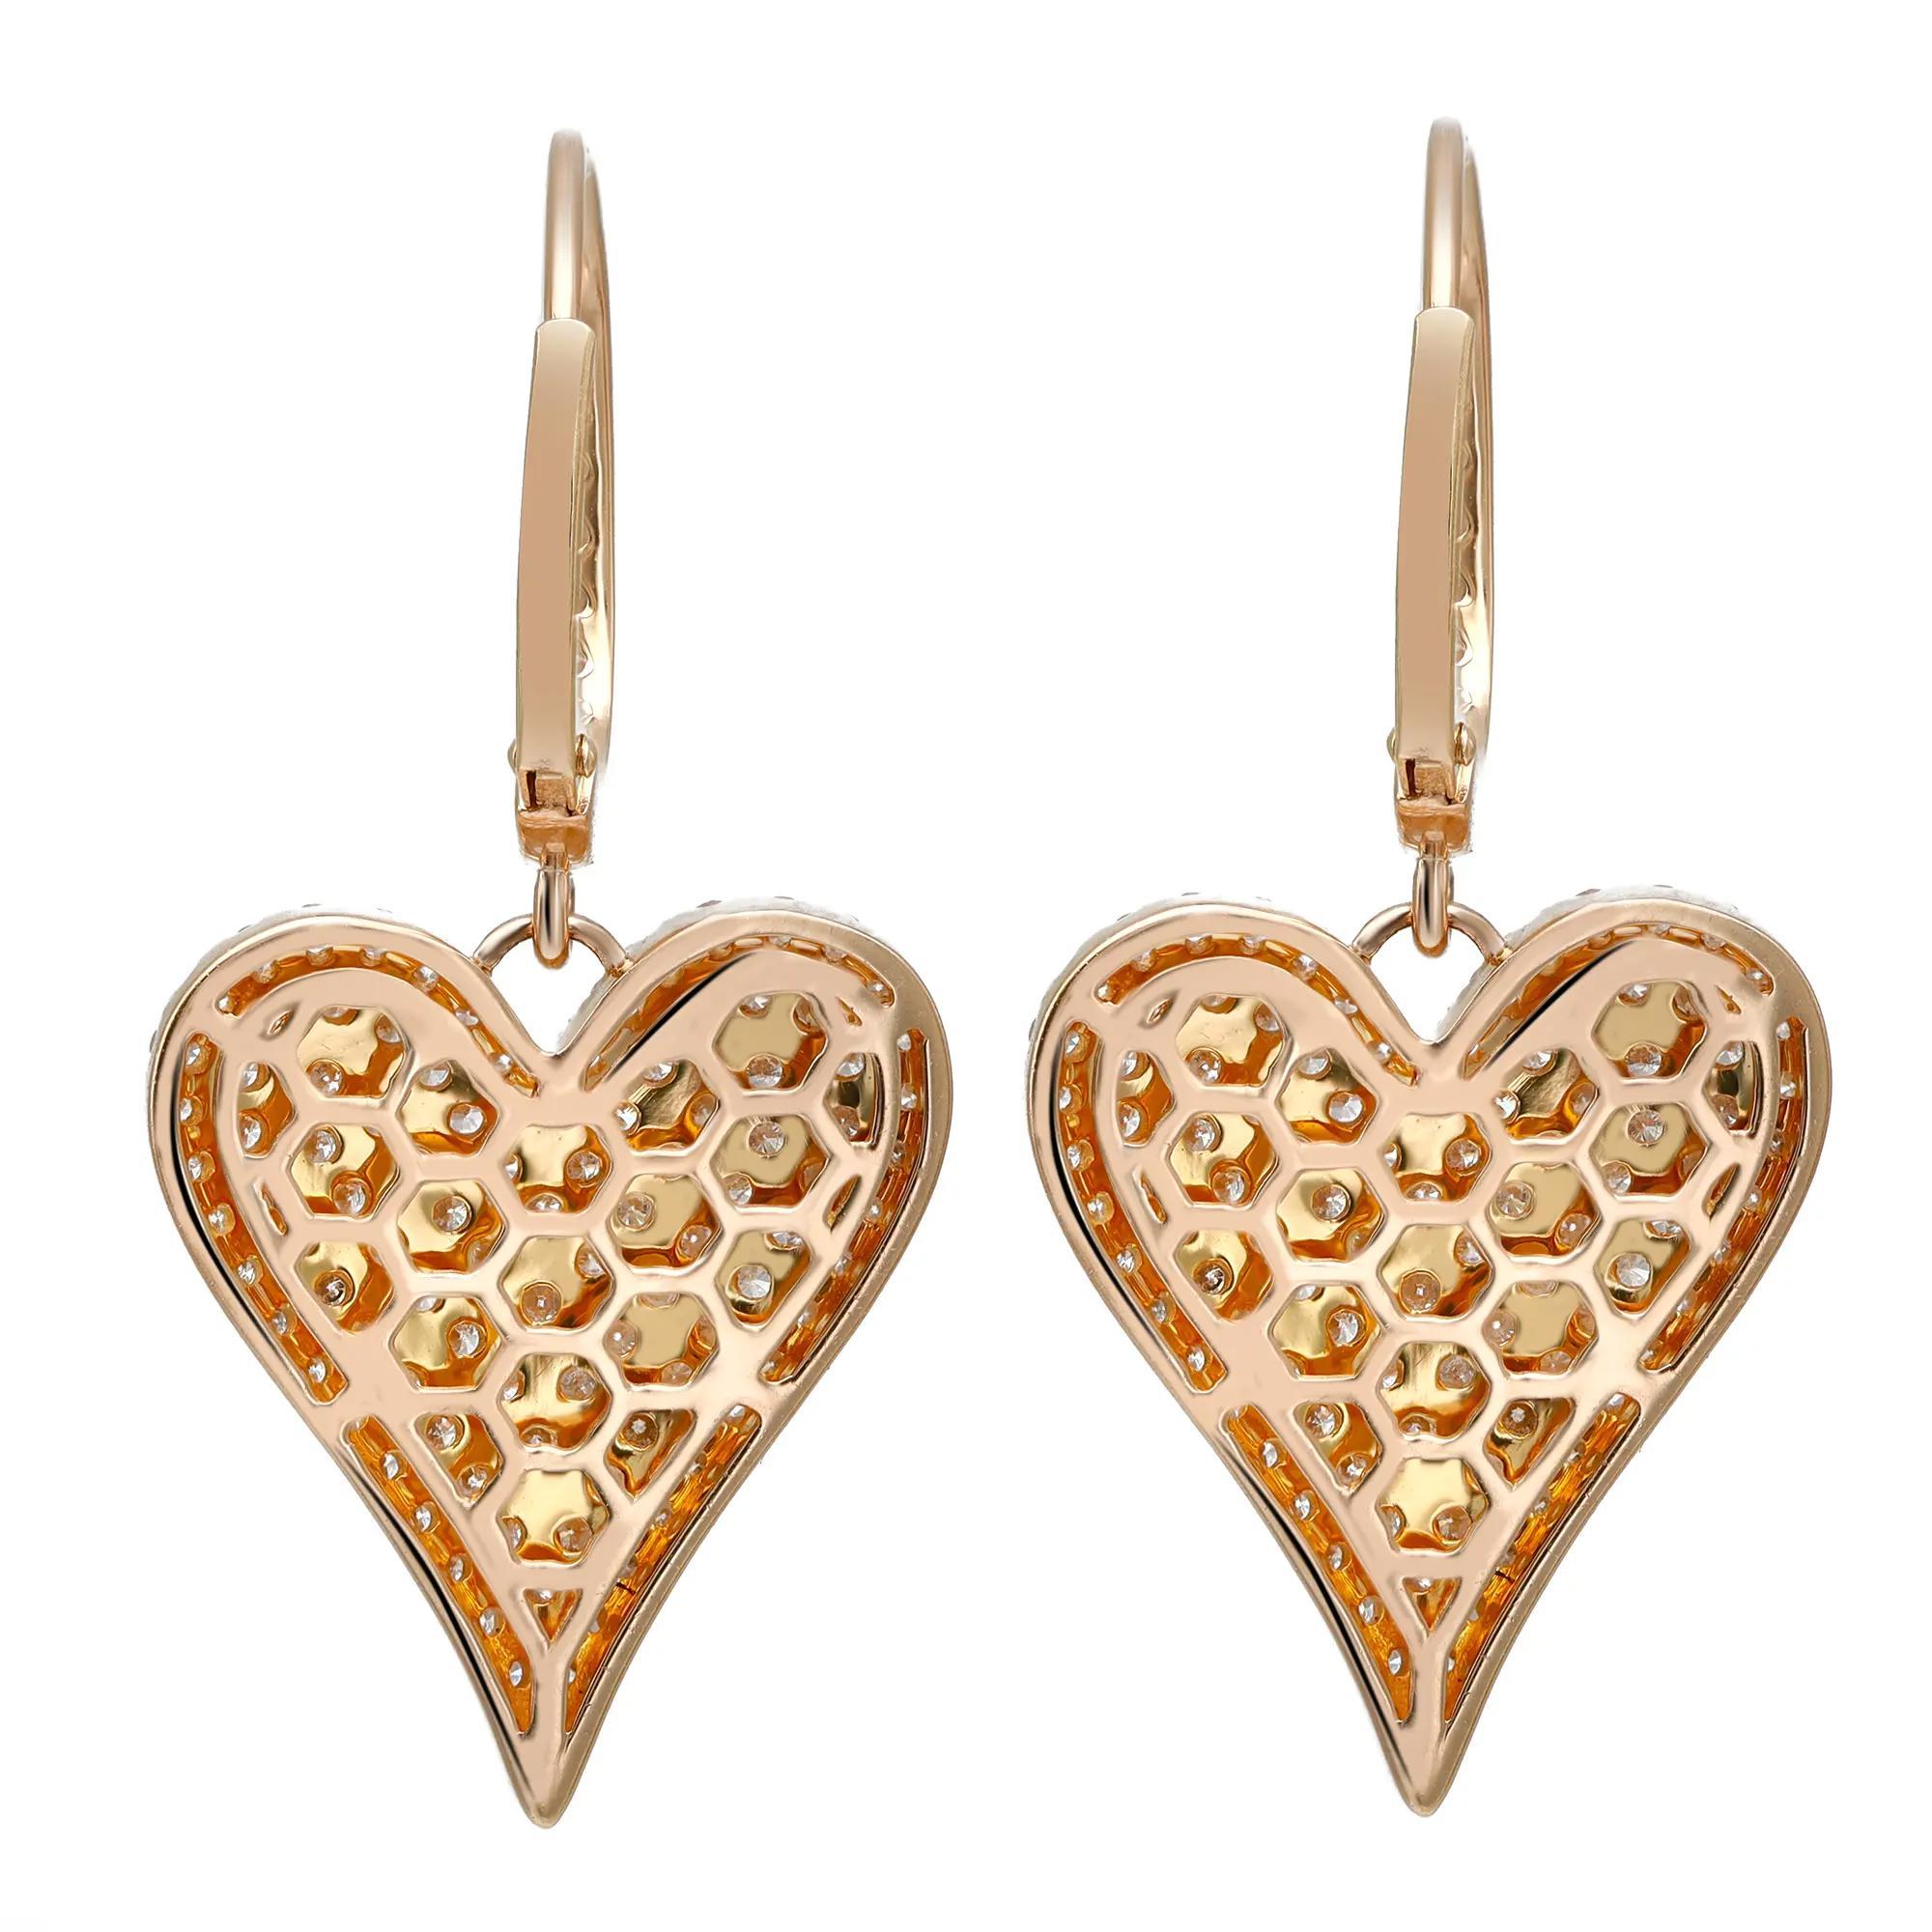 Pave Round Cut Diamond Heart Drop Earrings 14K Yellow Gold 2.00Cttw In New Condition For Sale In New York, NY